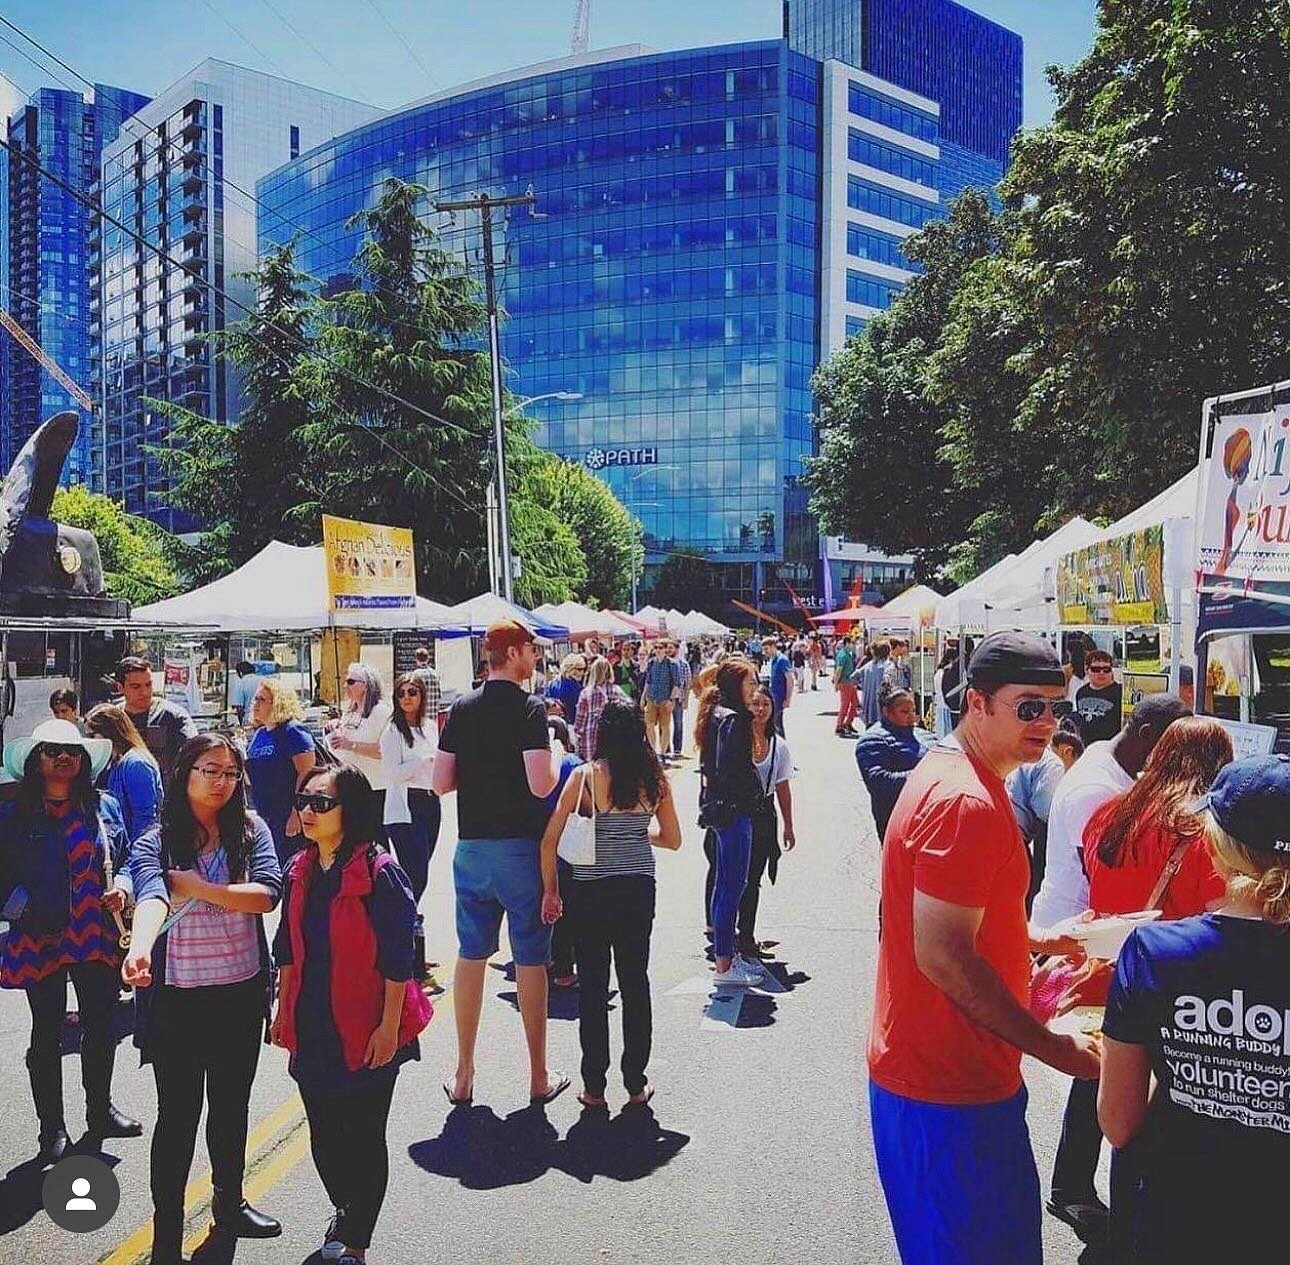 Have you heard the good news? Our sibling market, @slusaturdaymarket returns on Saturday, May 4th to @southlakeunion for its 9th and largest season yet! Stay tuned for all the fun this Spring/Summer season. See you in the SLU! #seattlemade #downtowns